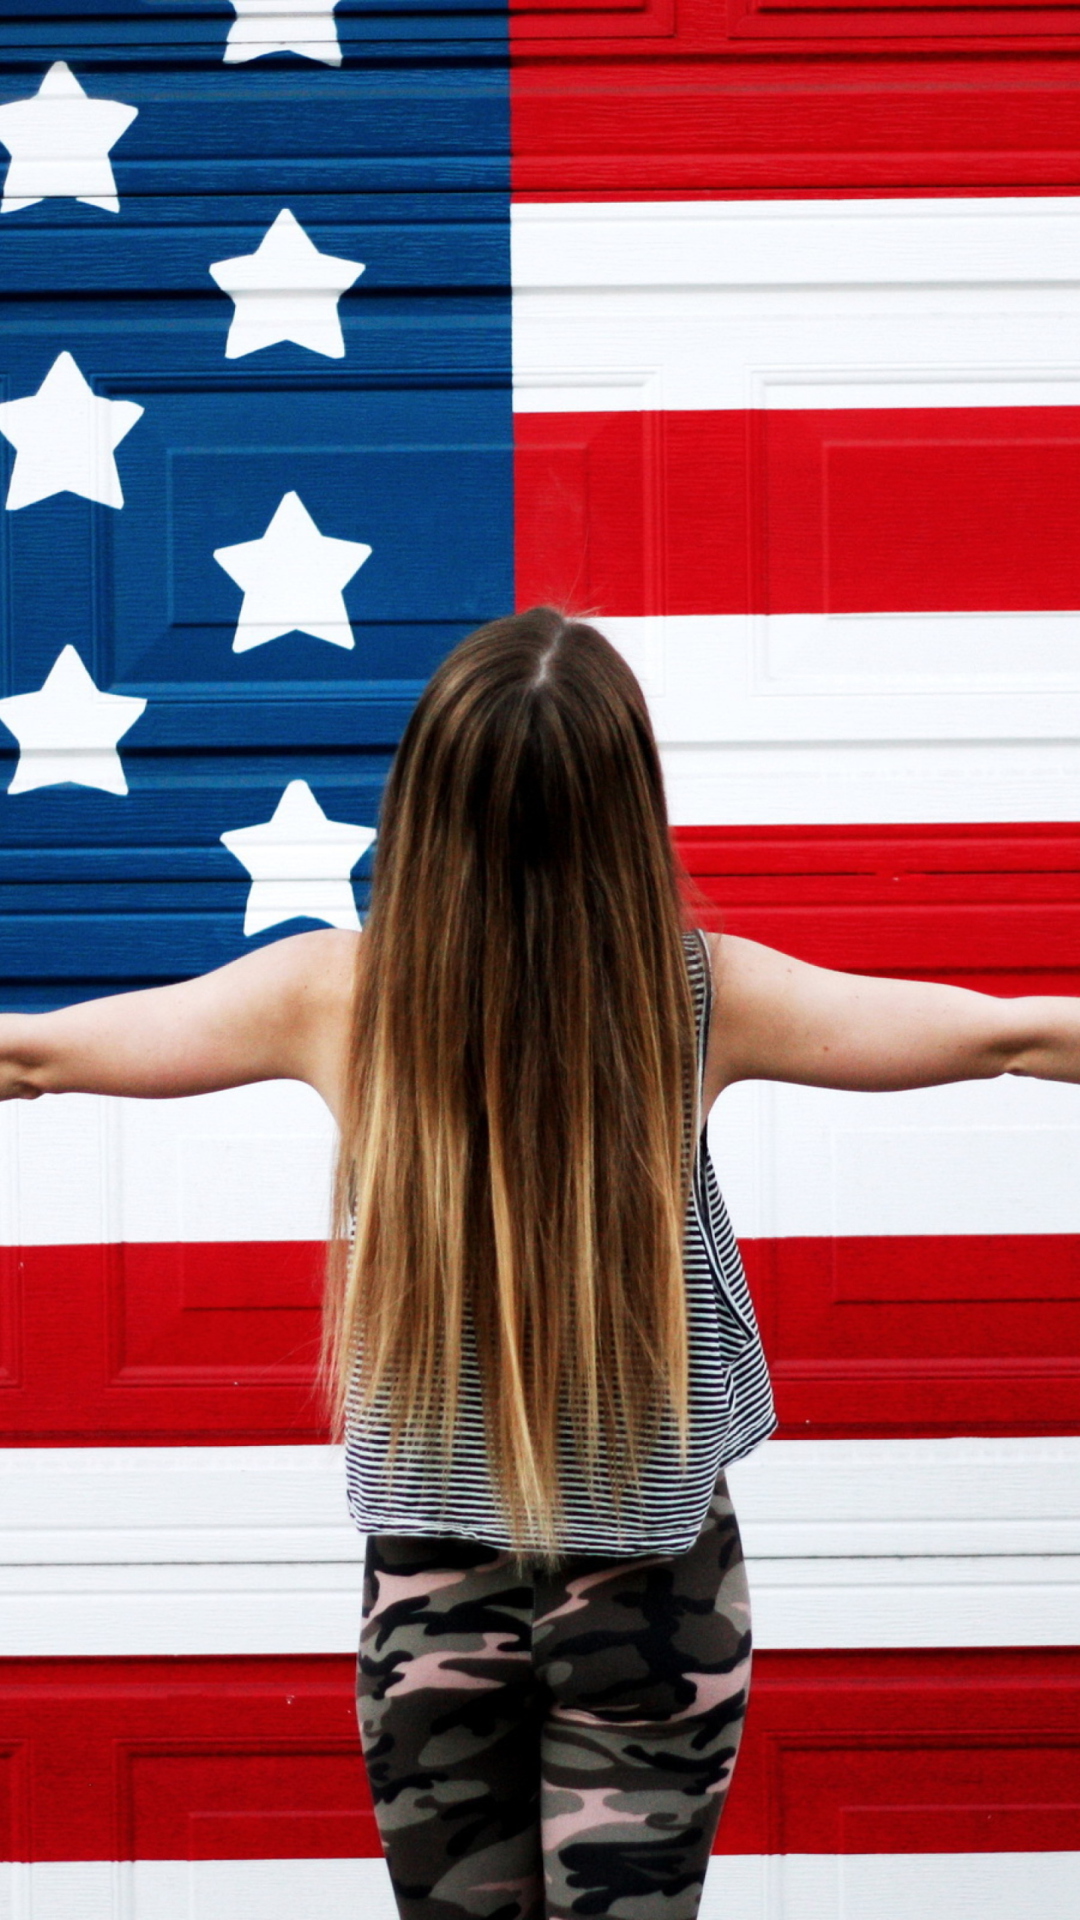 American Girl In Front Of USA Flag wallpaper 1080x1920